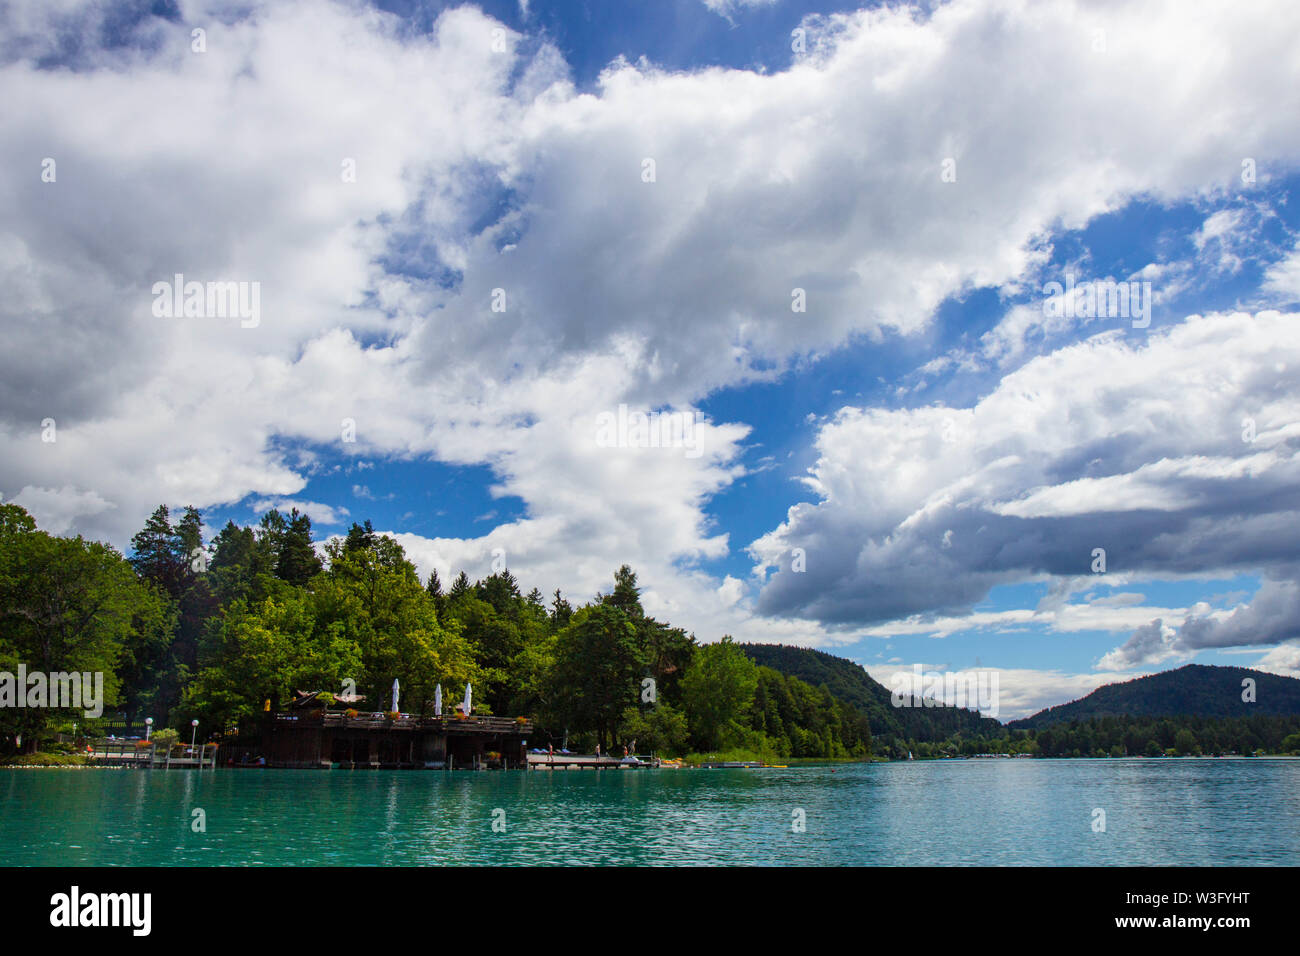 sky over Faaker see in Ausrian Alps, Carinthia region Stock Photo